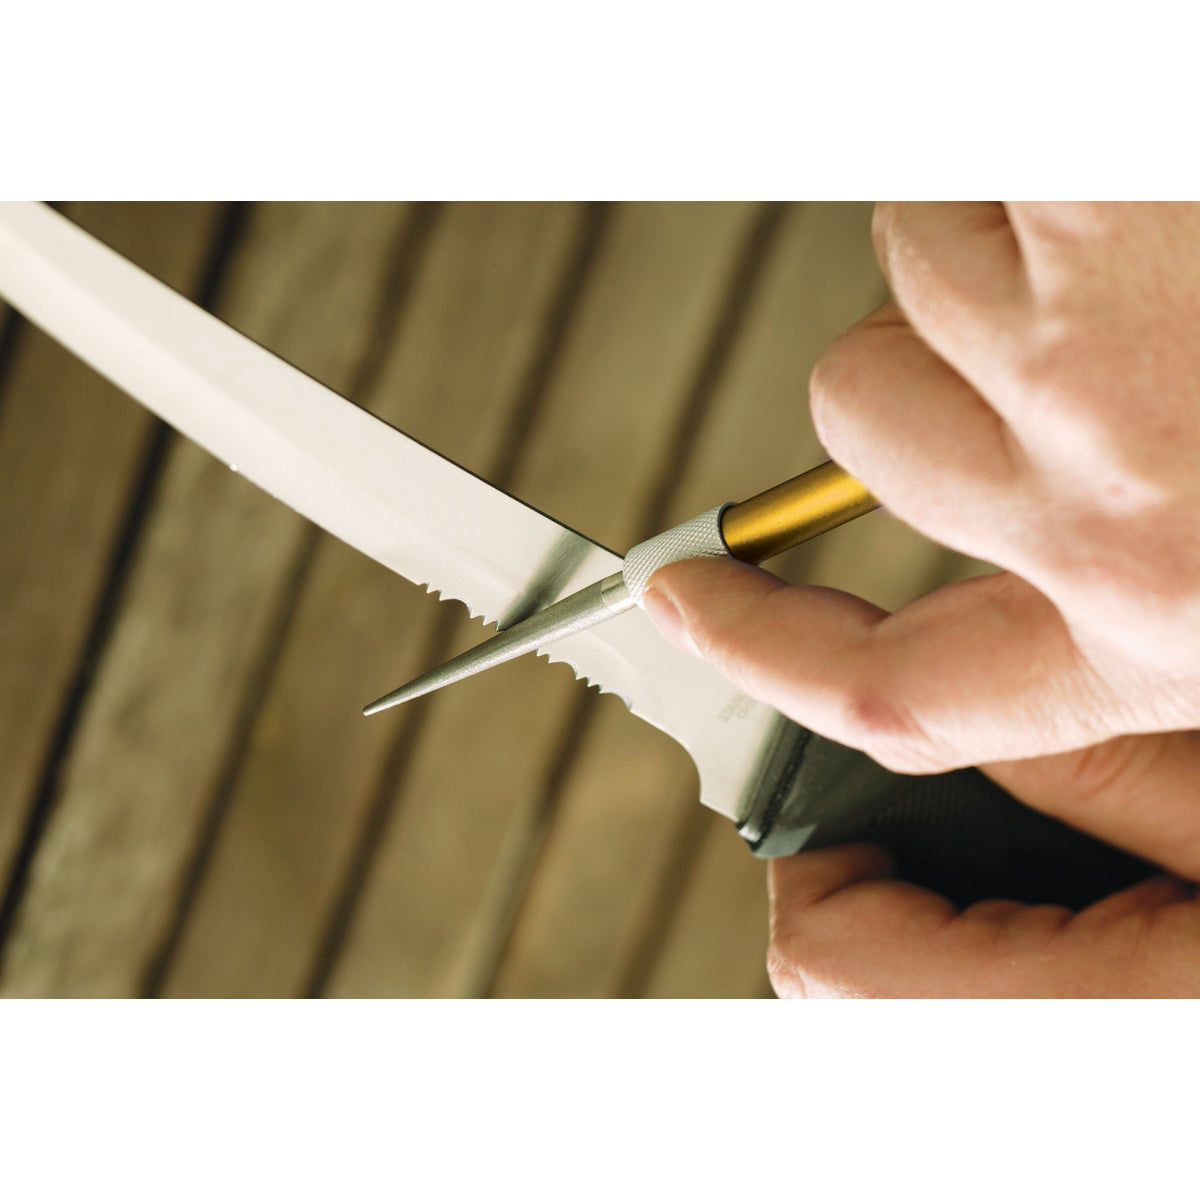 Smith's Consumer Products Store. DUAL GRIT DIAMOND STONE SHARPENER